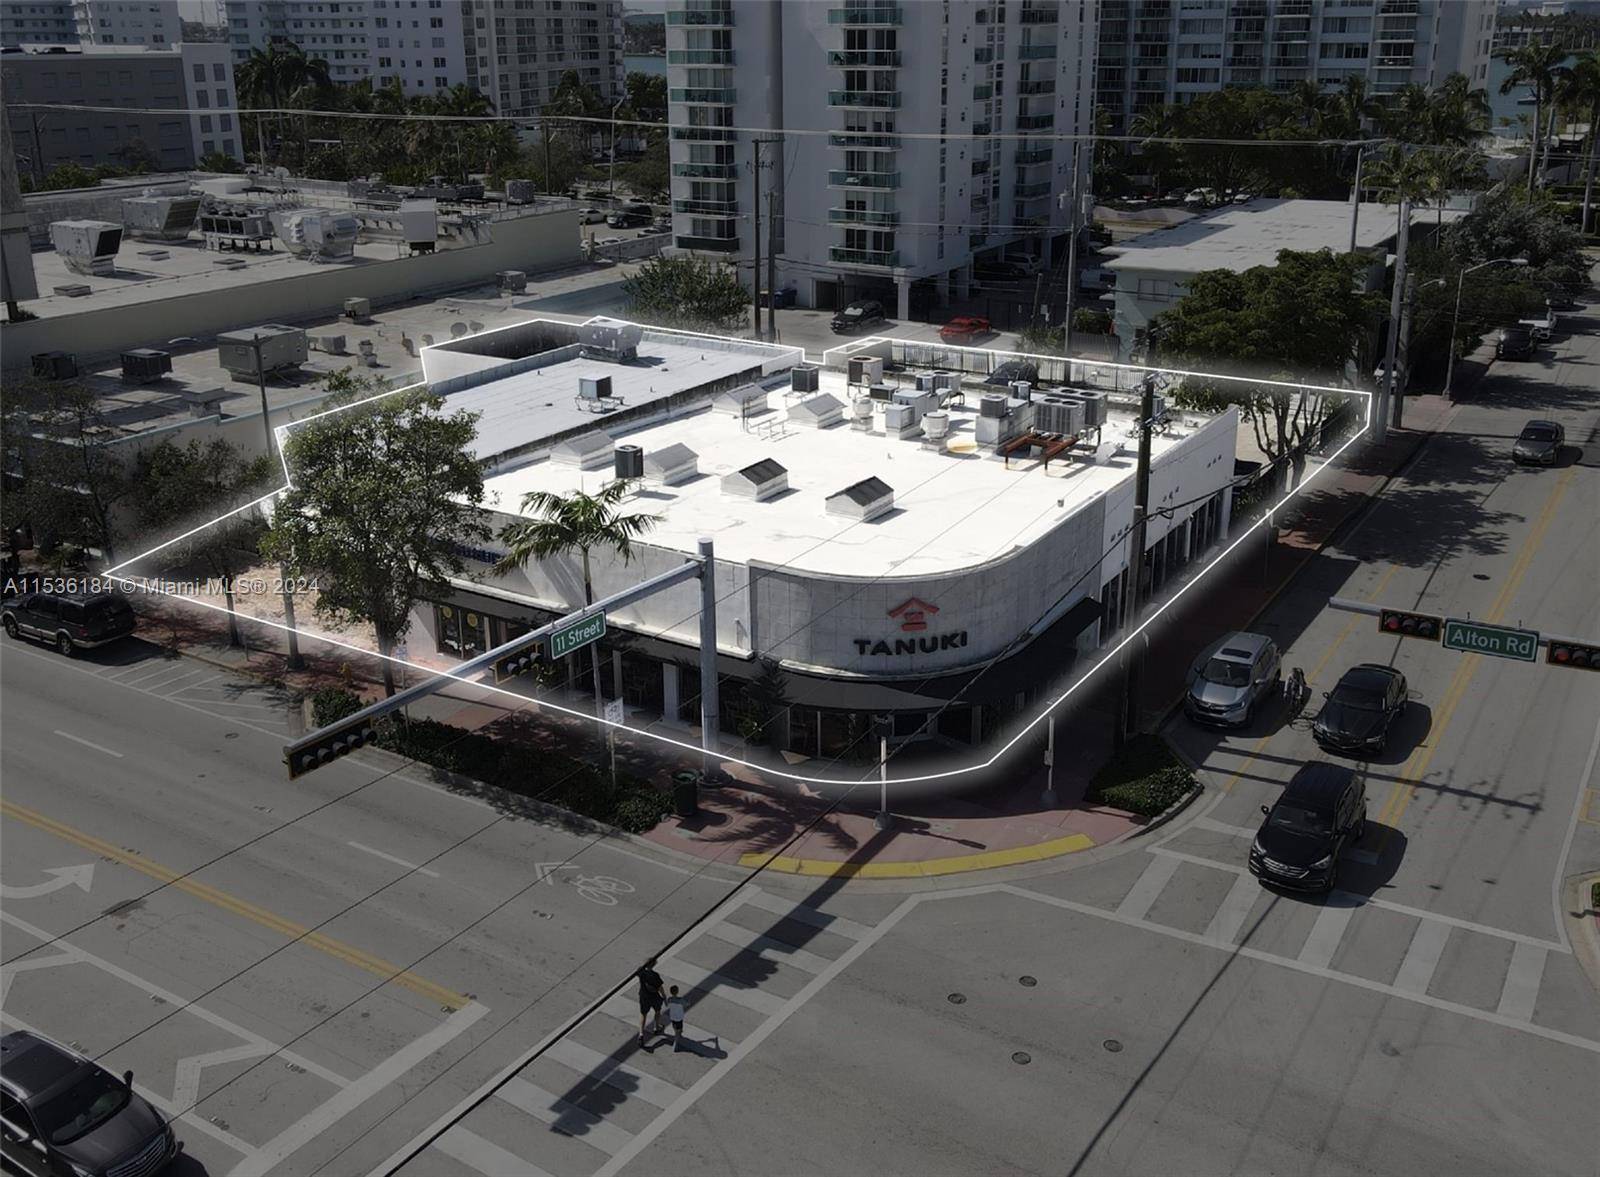 Future upside as market rents increase Consistent rental increases Future development site Onsite parking Immediate access to I 195 and I 95 Tenants Tanuki, OXXO Cleaners Eden Apotheke Minutes from ...